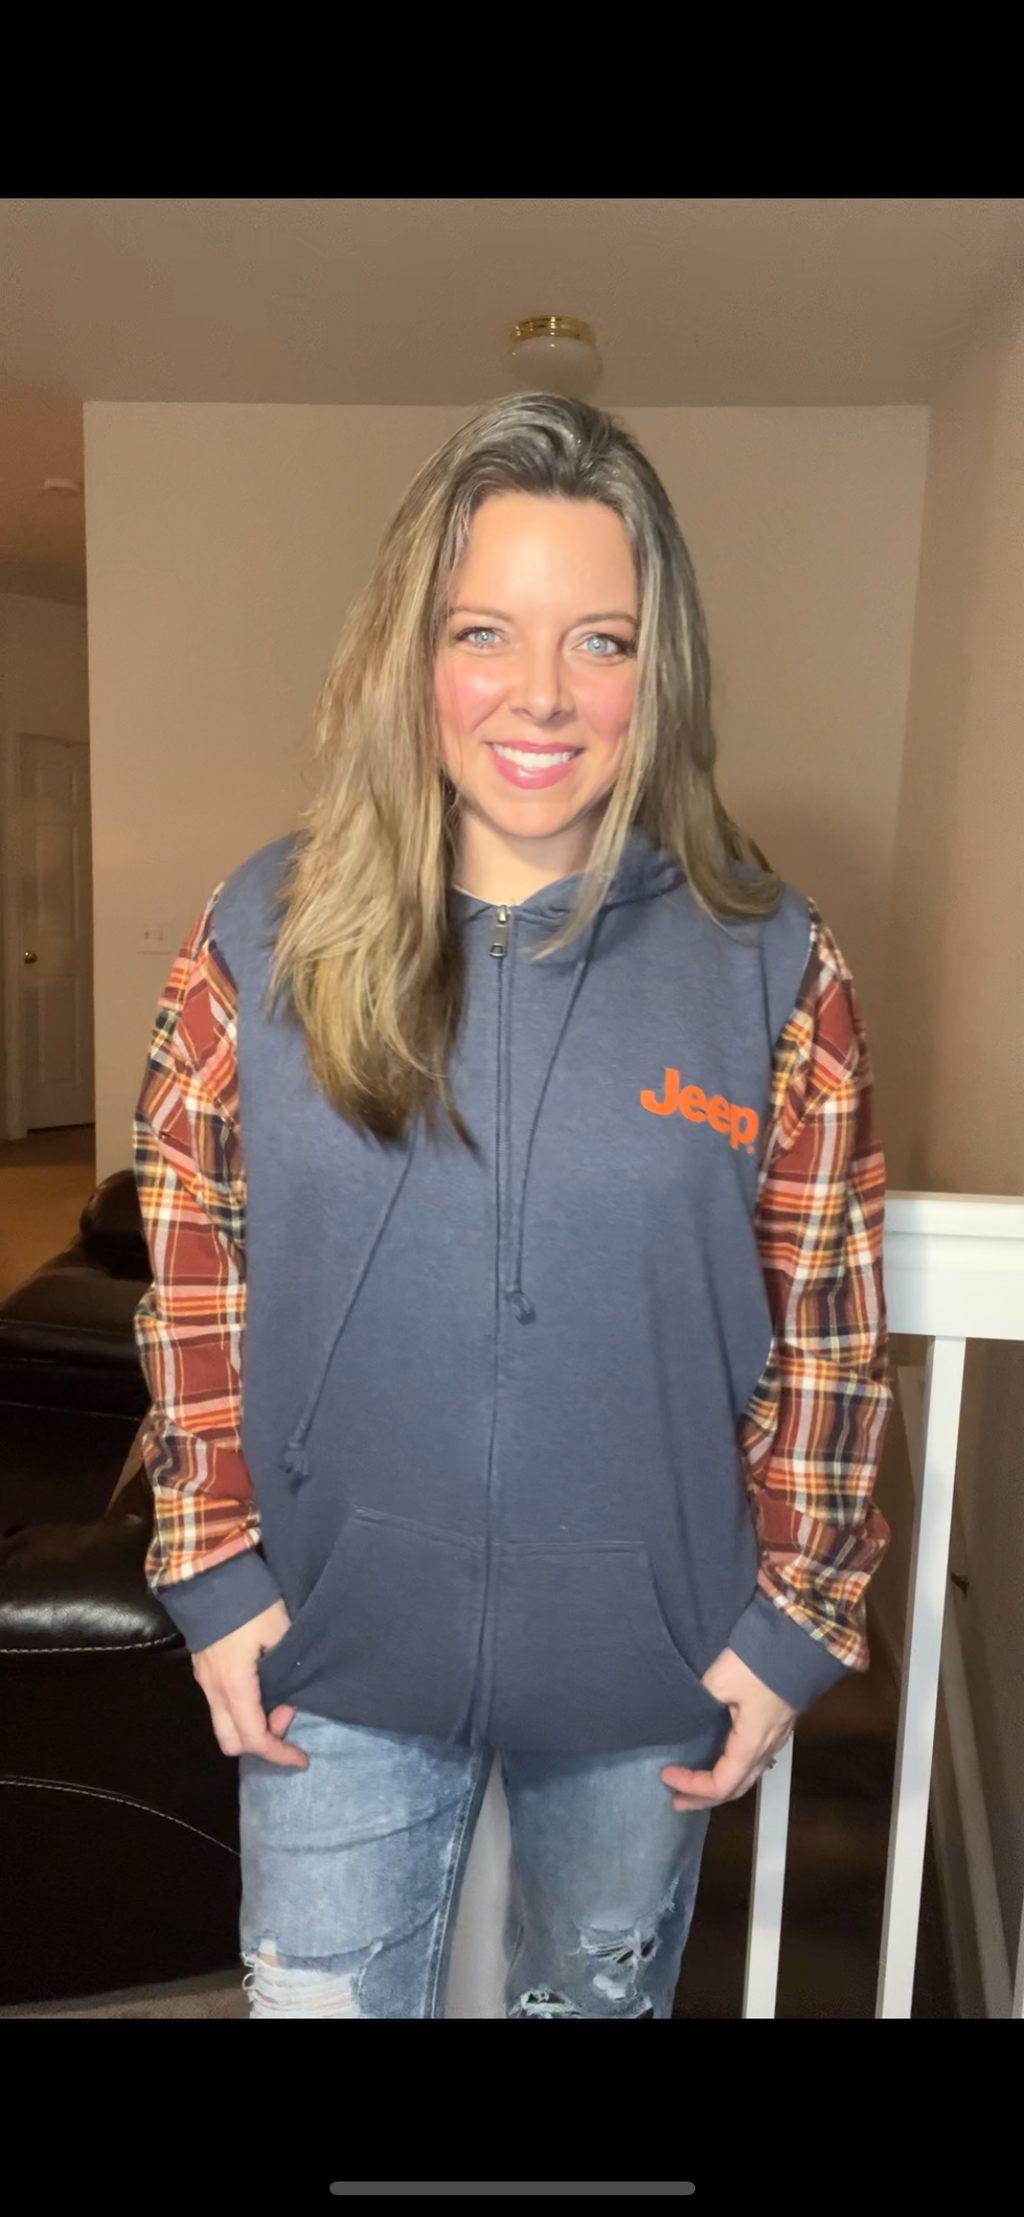 Upcycled Jeep – women’s XL/1X – midweight zip sweatshirt with flannel sleeves￼